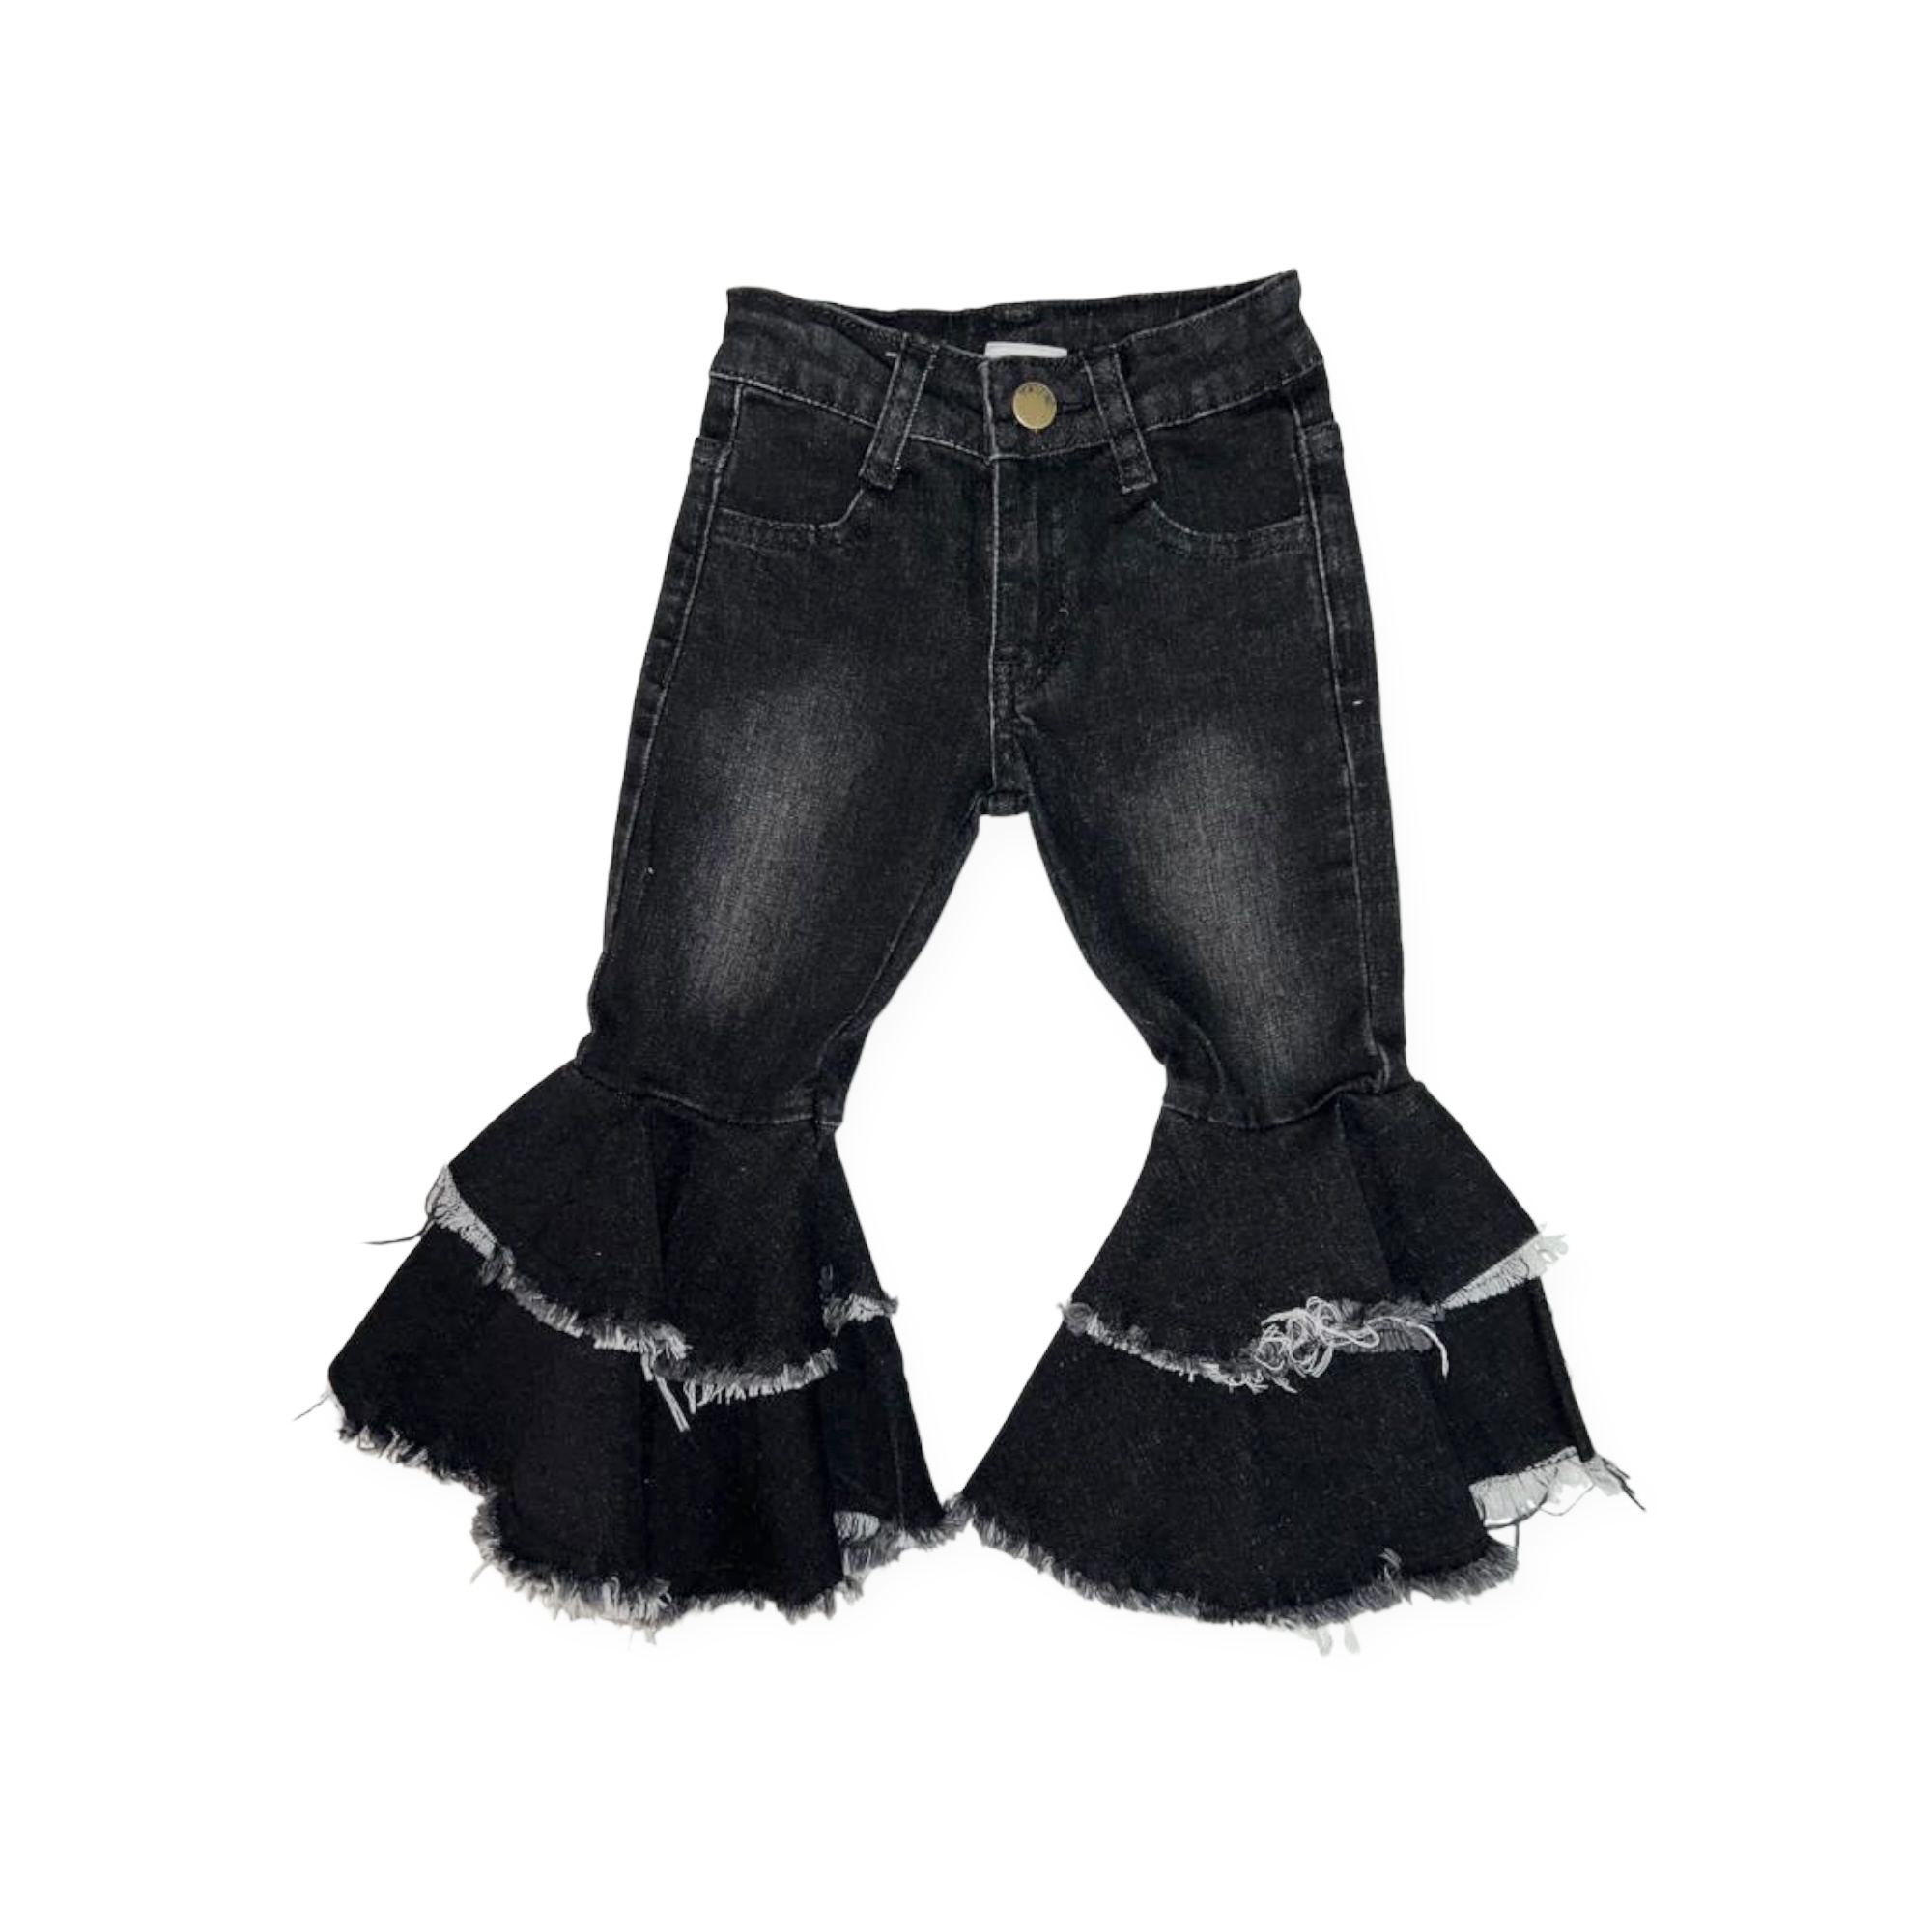 Bell Bottom Fray Jeans - Calakids